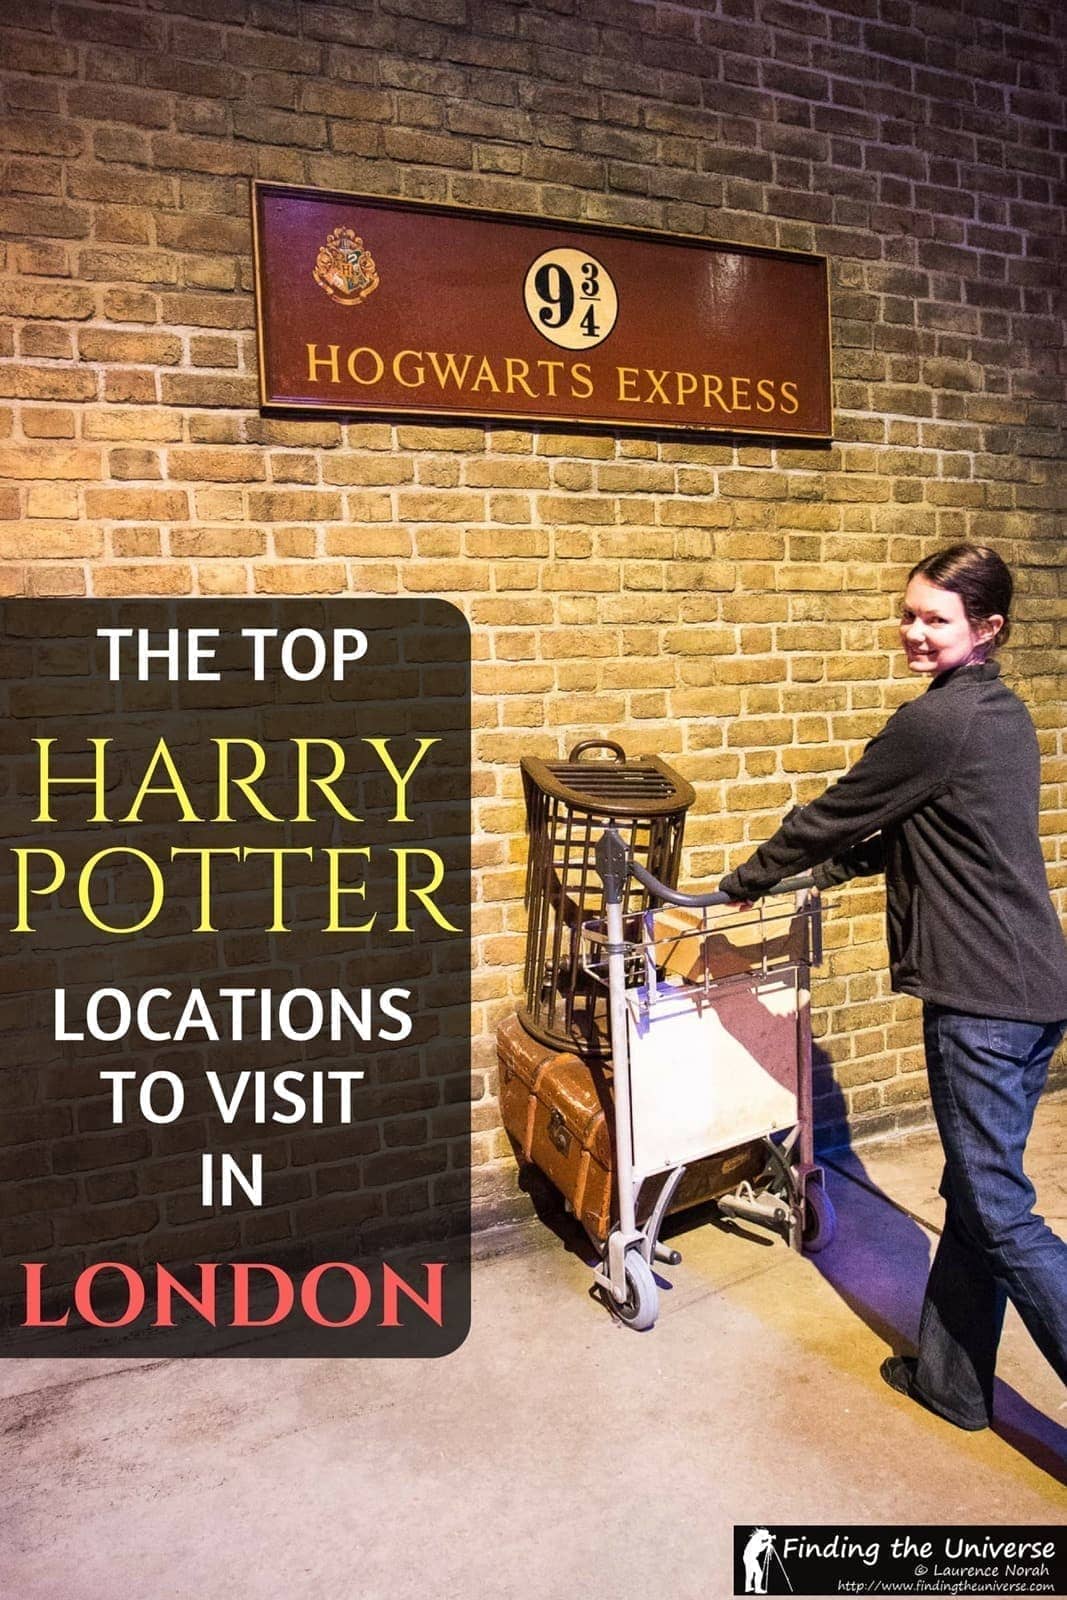 All the key Harry Potter locations you can visit in London, from Platform 9 3/4 at Kings Cross to Gringotts Bank and the Ministry of Magic!